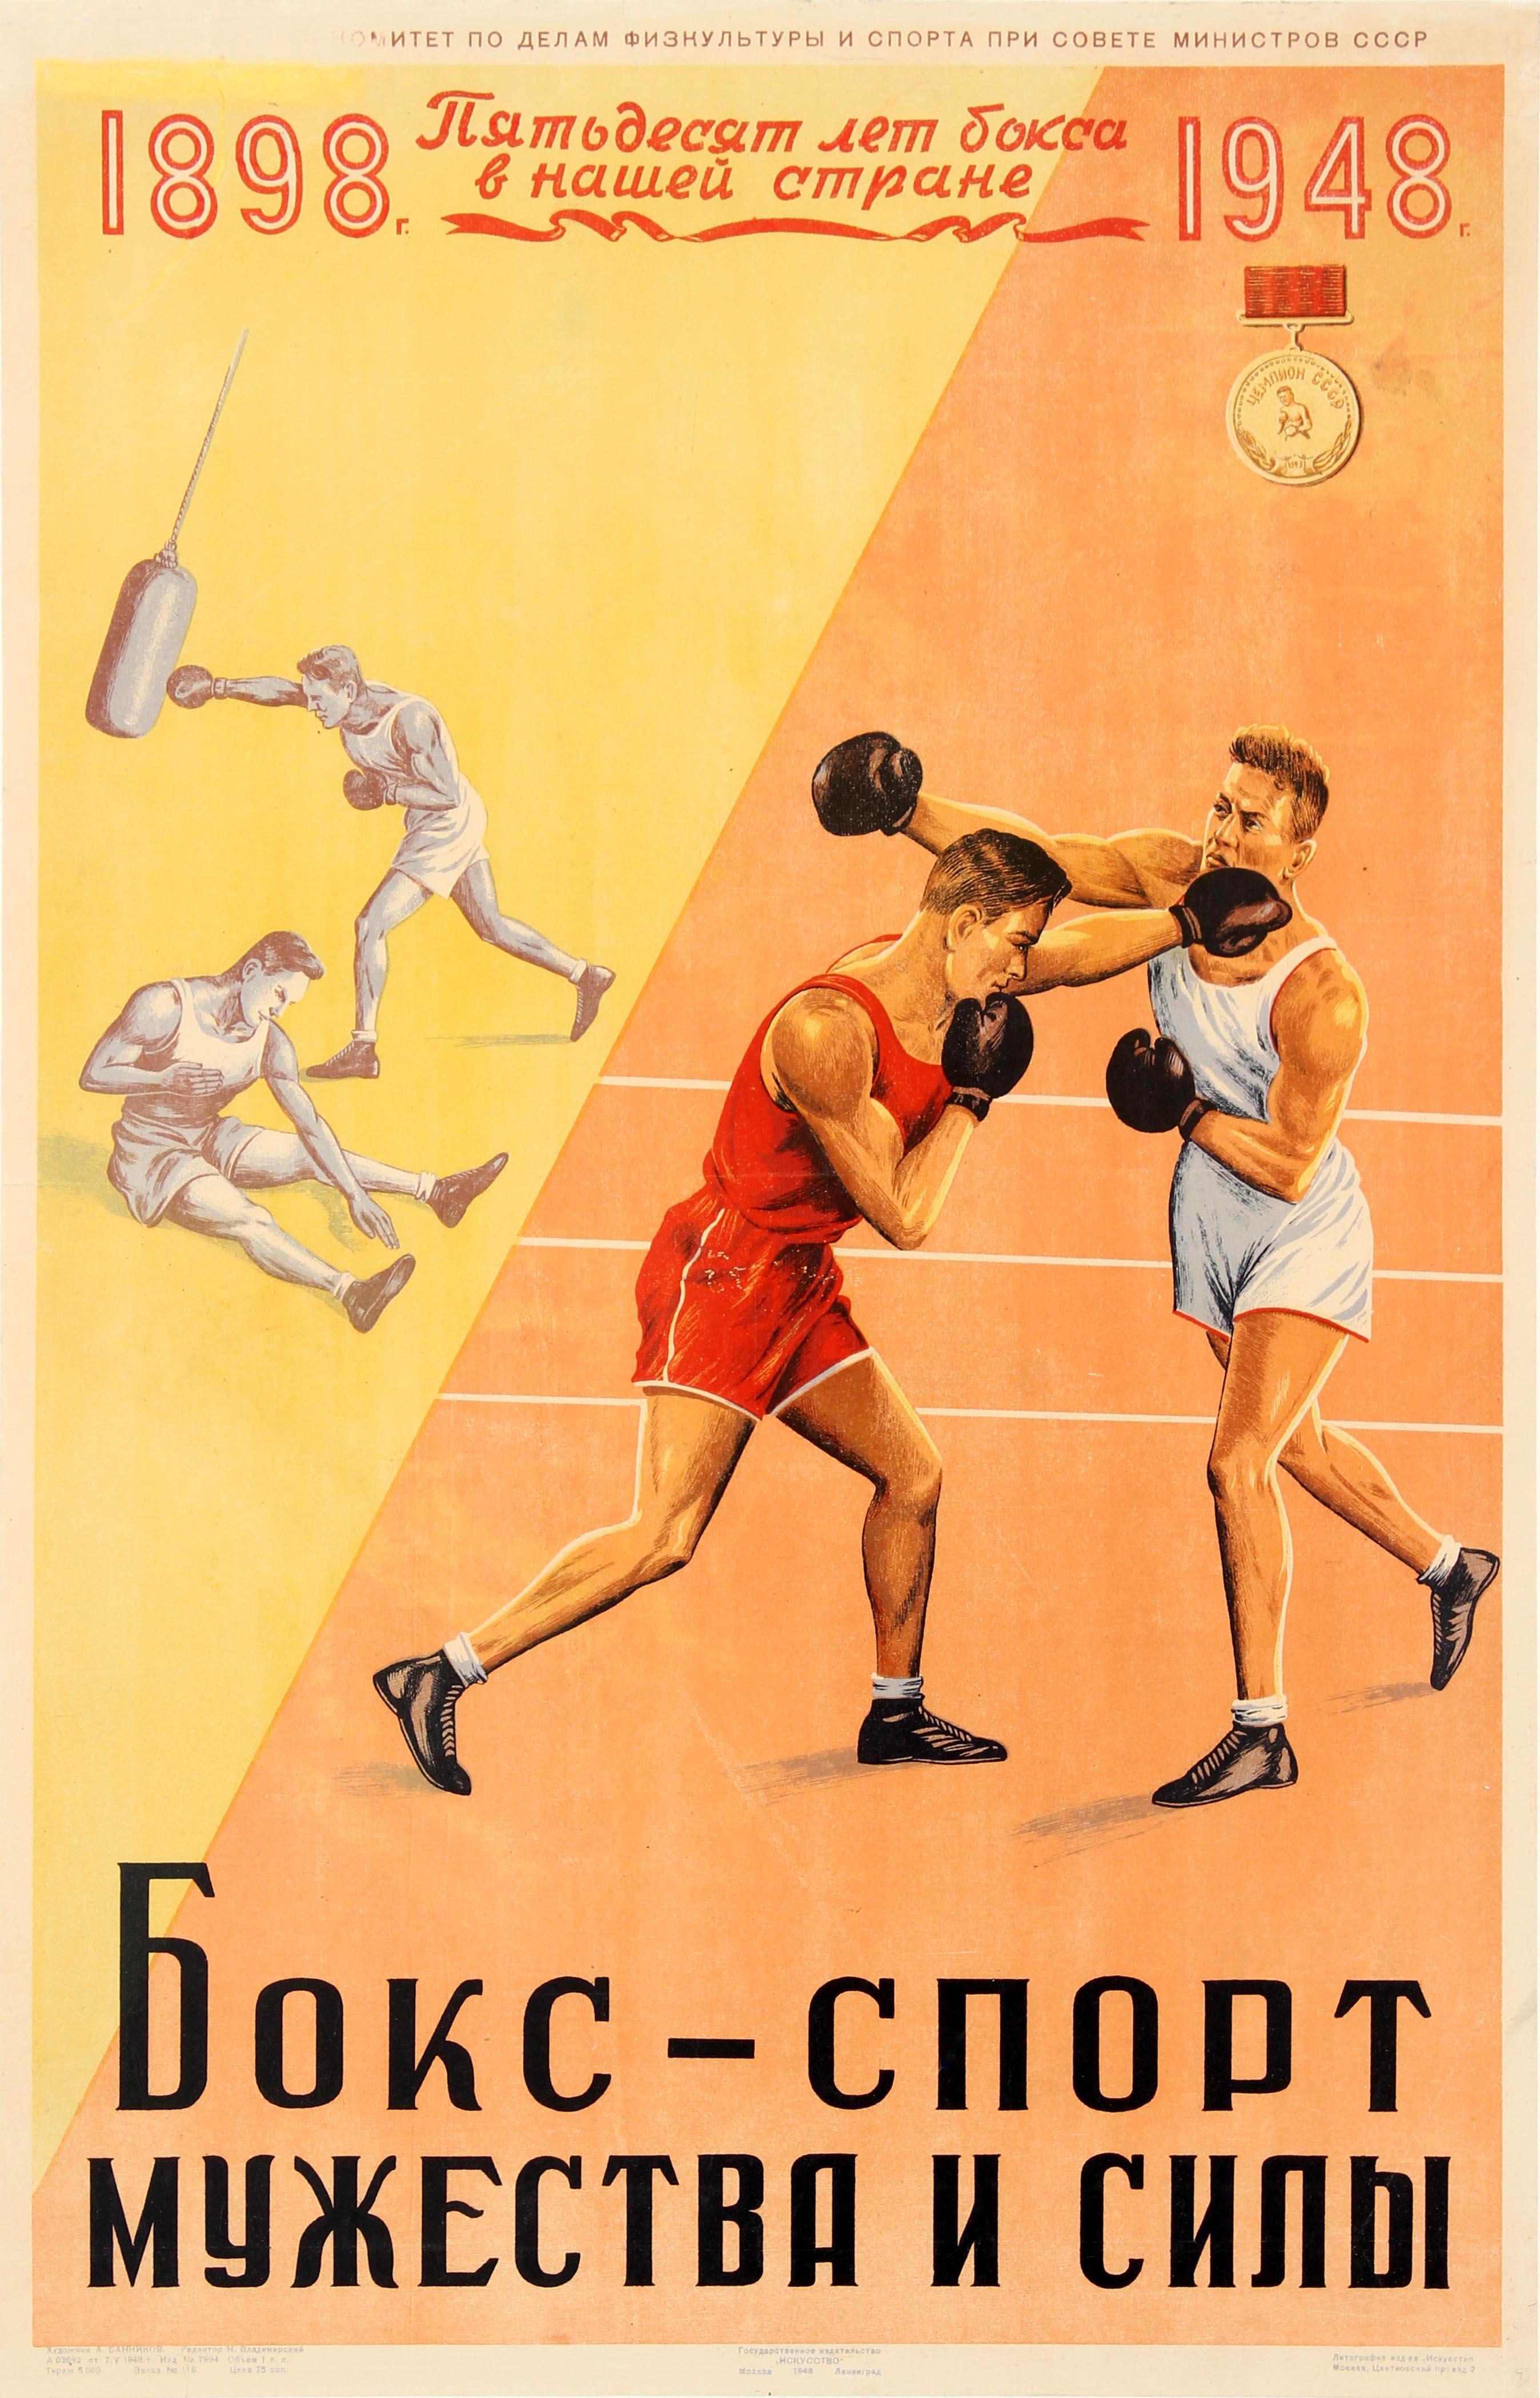 A. Bannikov Print - Original Vintage Soviet Sport Poster For 50 Years Of Boxing In Russia 1898 1948